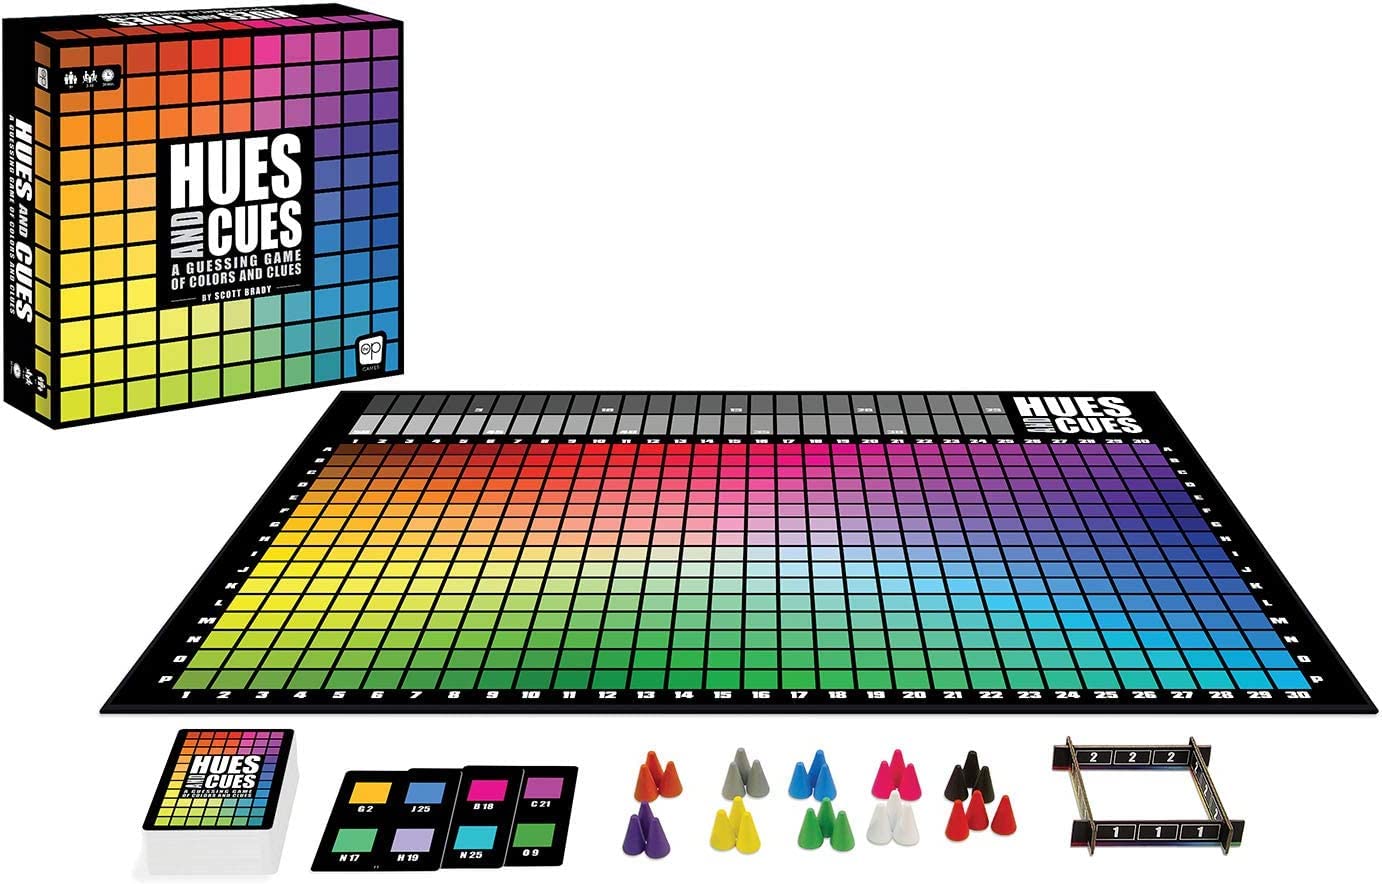 HUES and CUES | Vibrant Color Guessing Game Perfect for Family Game Night | Connect Clues and Colors Together | 480 Color Squares to Guess from | Award-Winning Board Game | 3-10 Players | Ages 8+